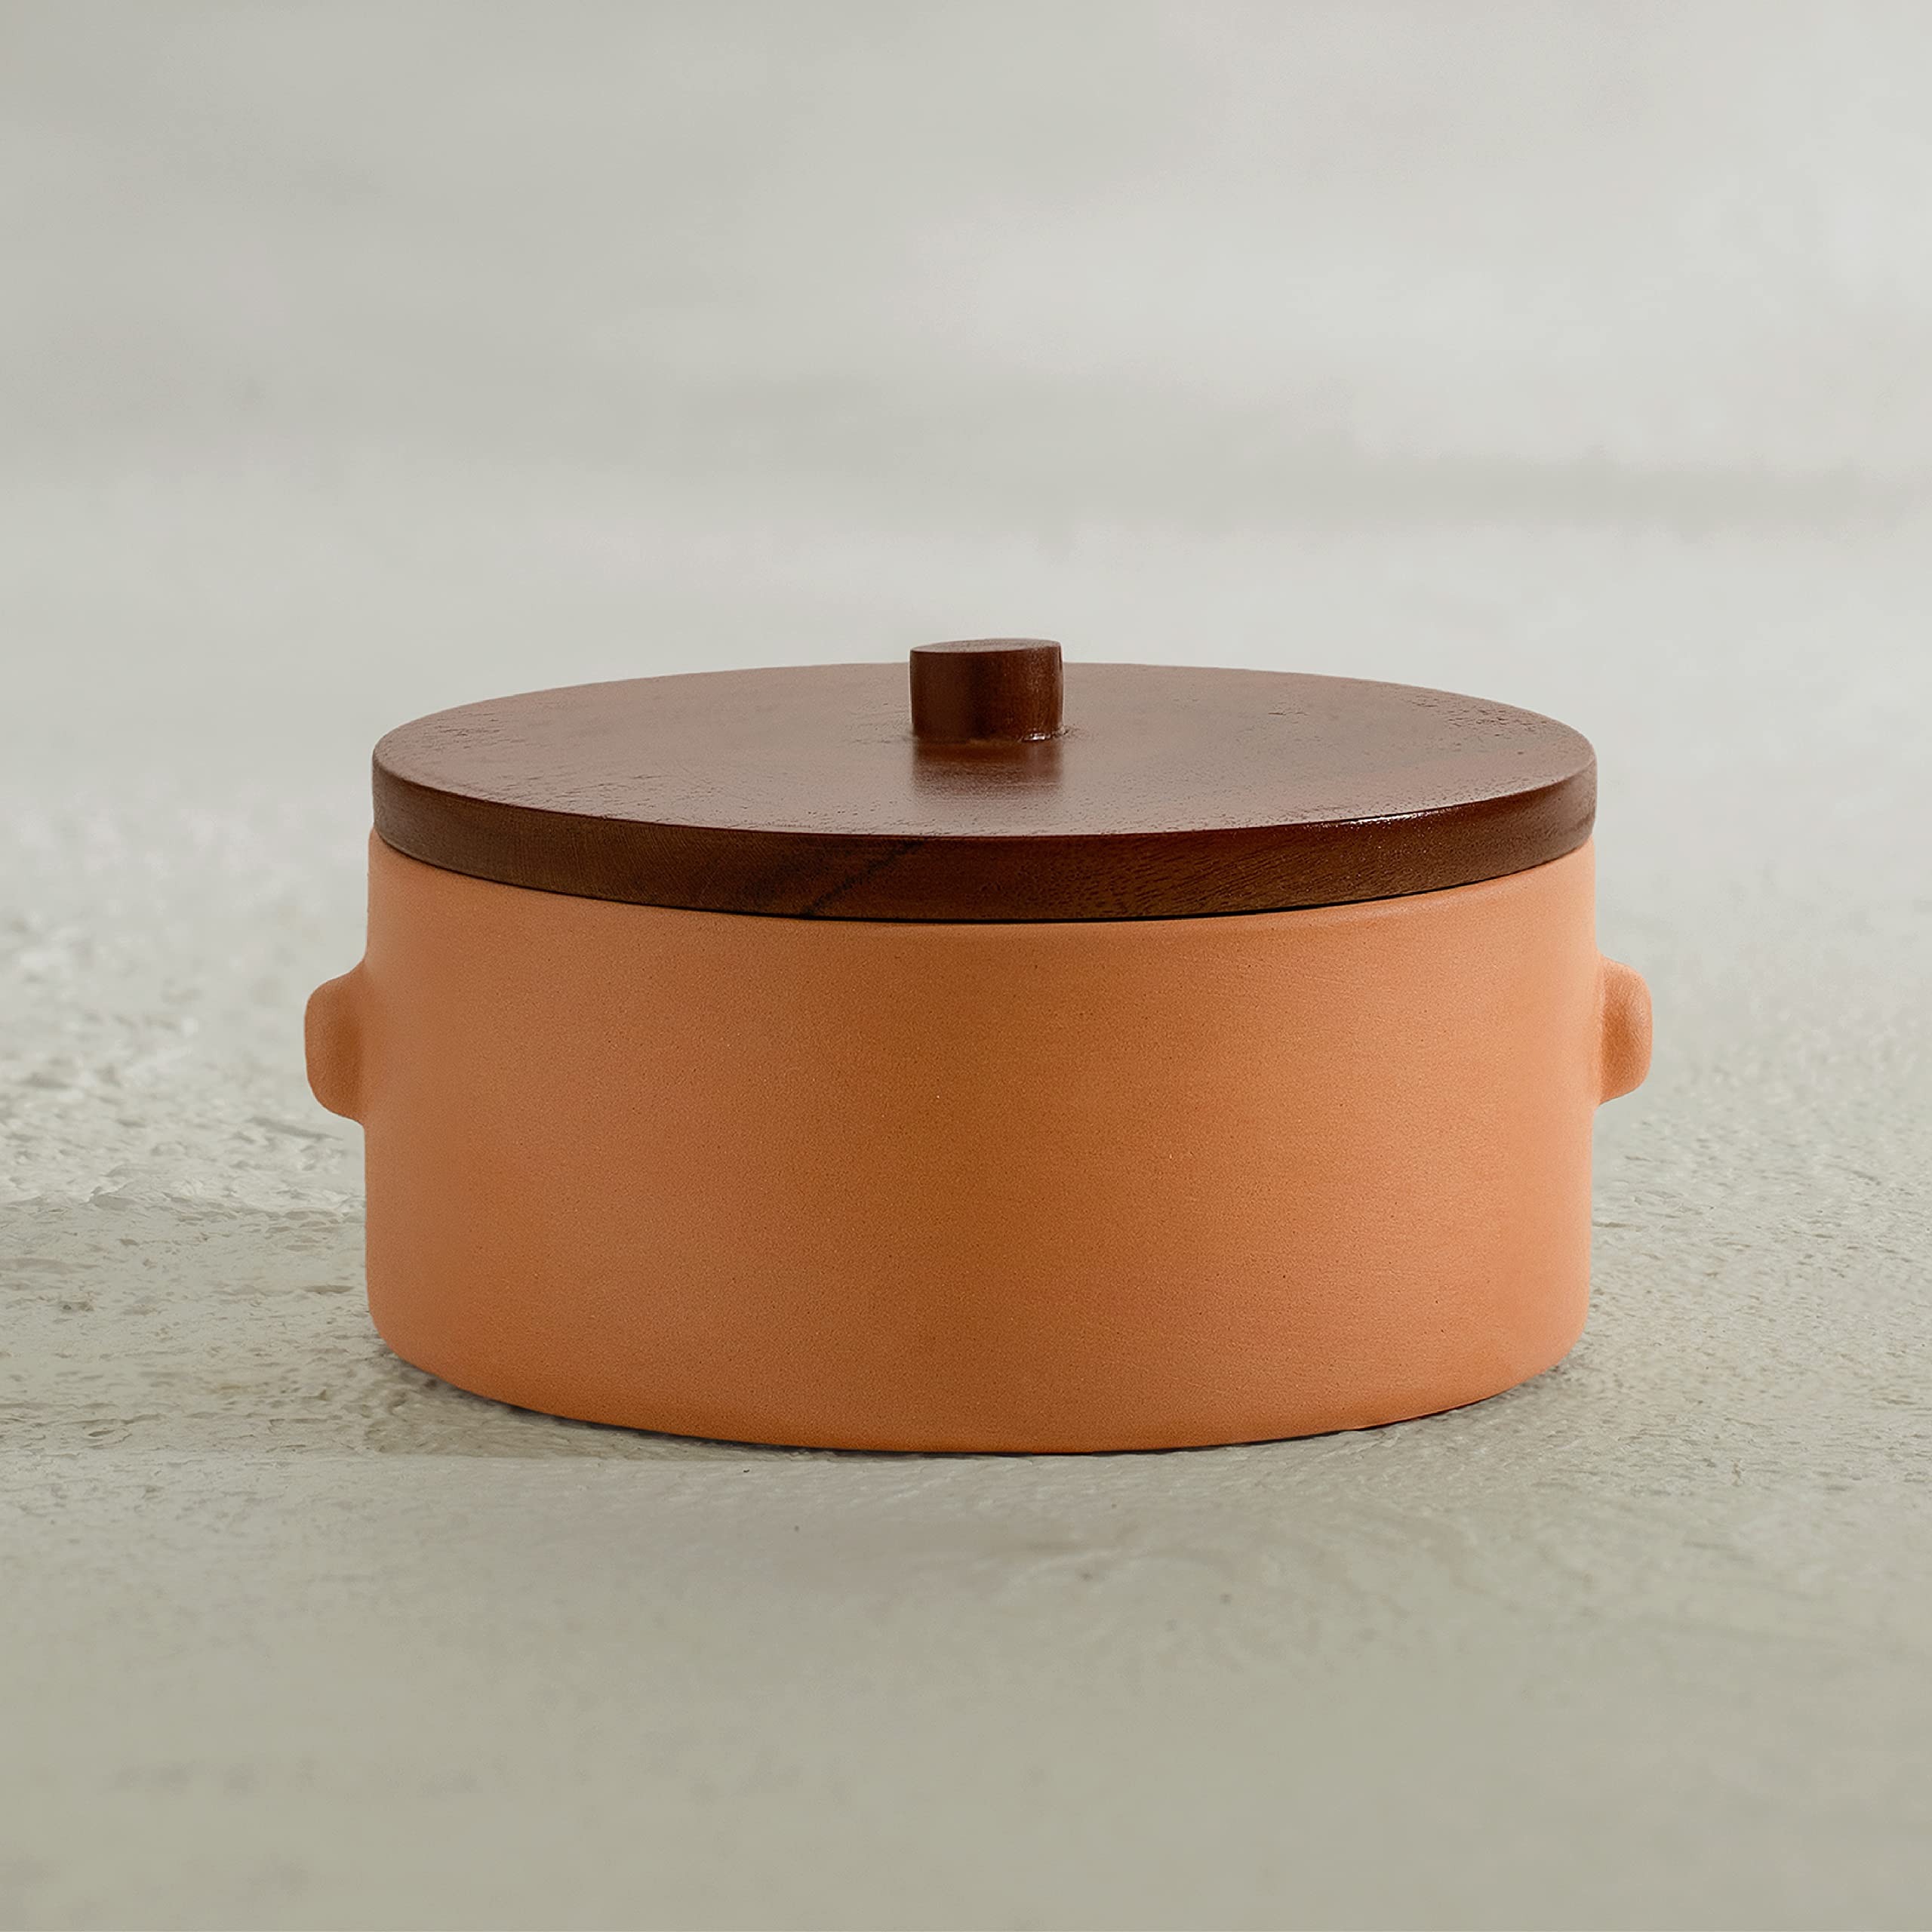 Ellementry Terracotta Curd Setter - Large| | with lid | Colour: Terracotta Red | Terracotta | Serving Bowl | 400 ML| Handcrafted | Sustainable | Food Safe | Gifting |